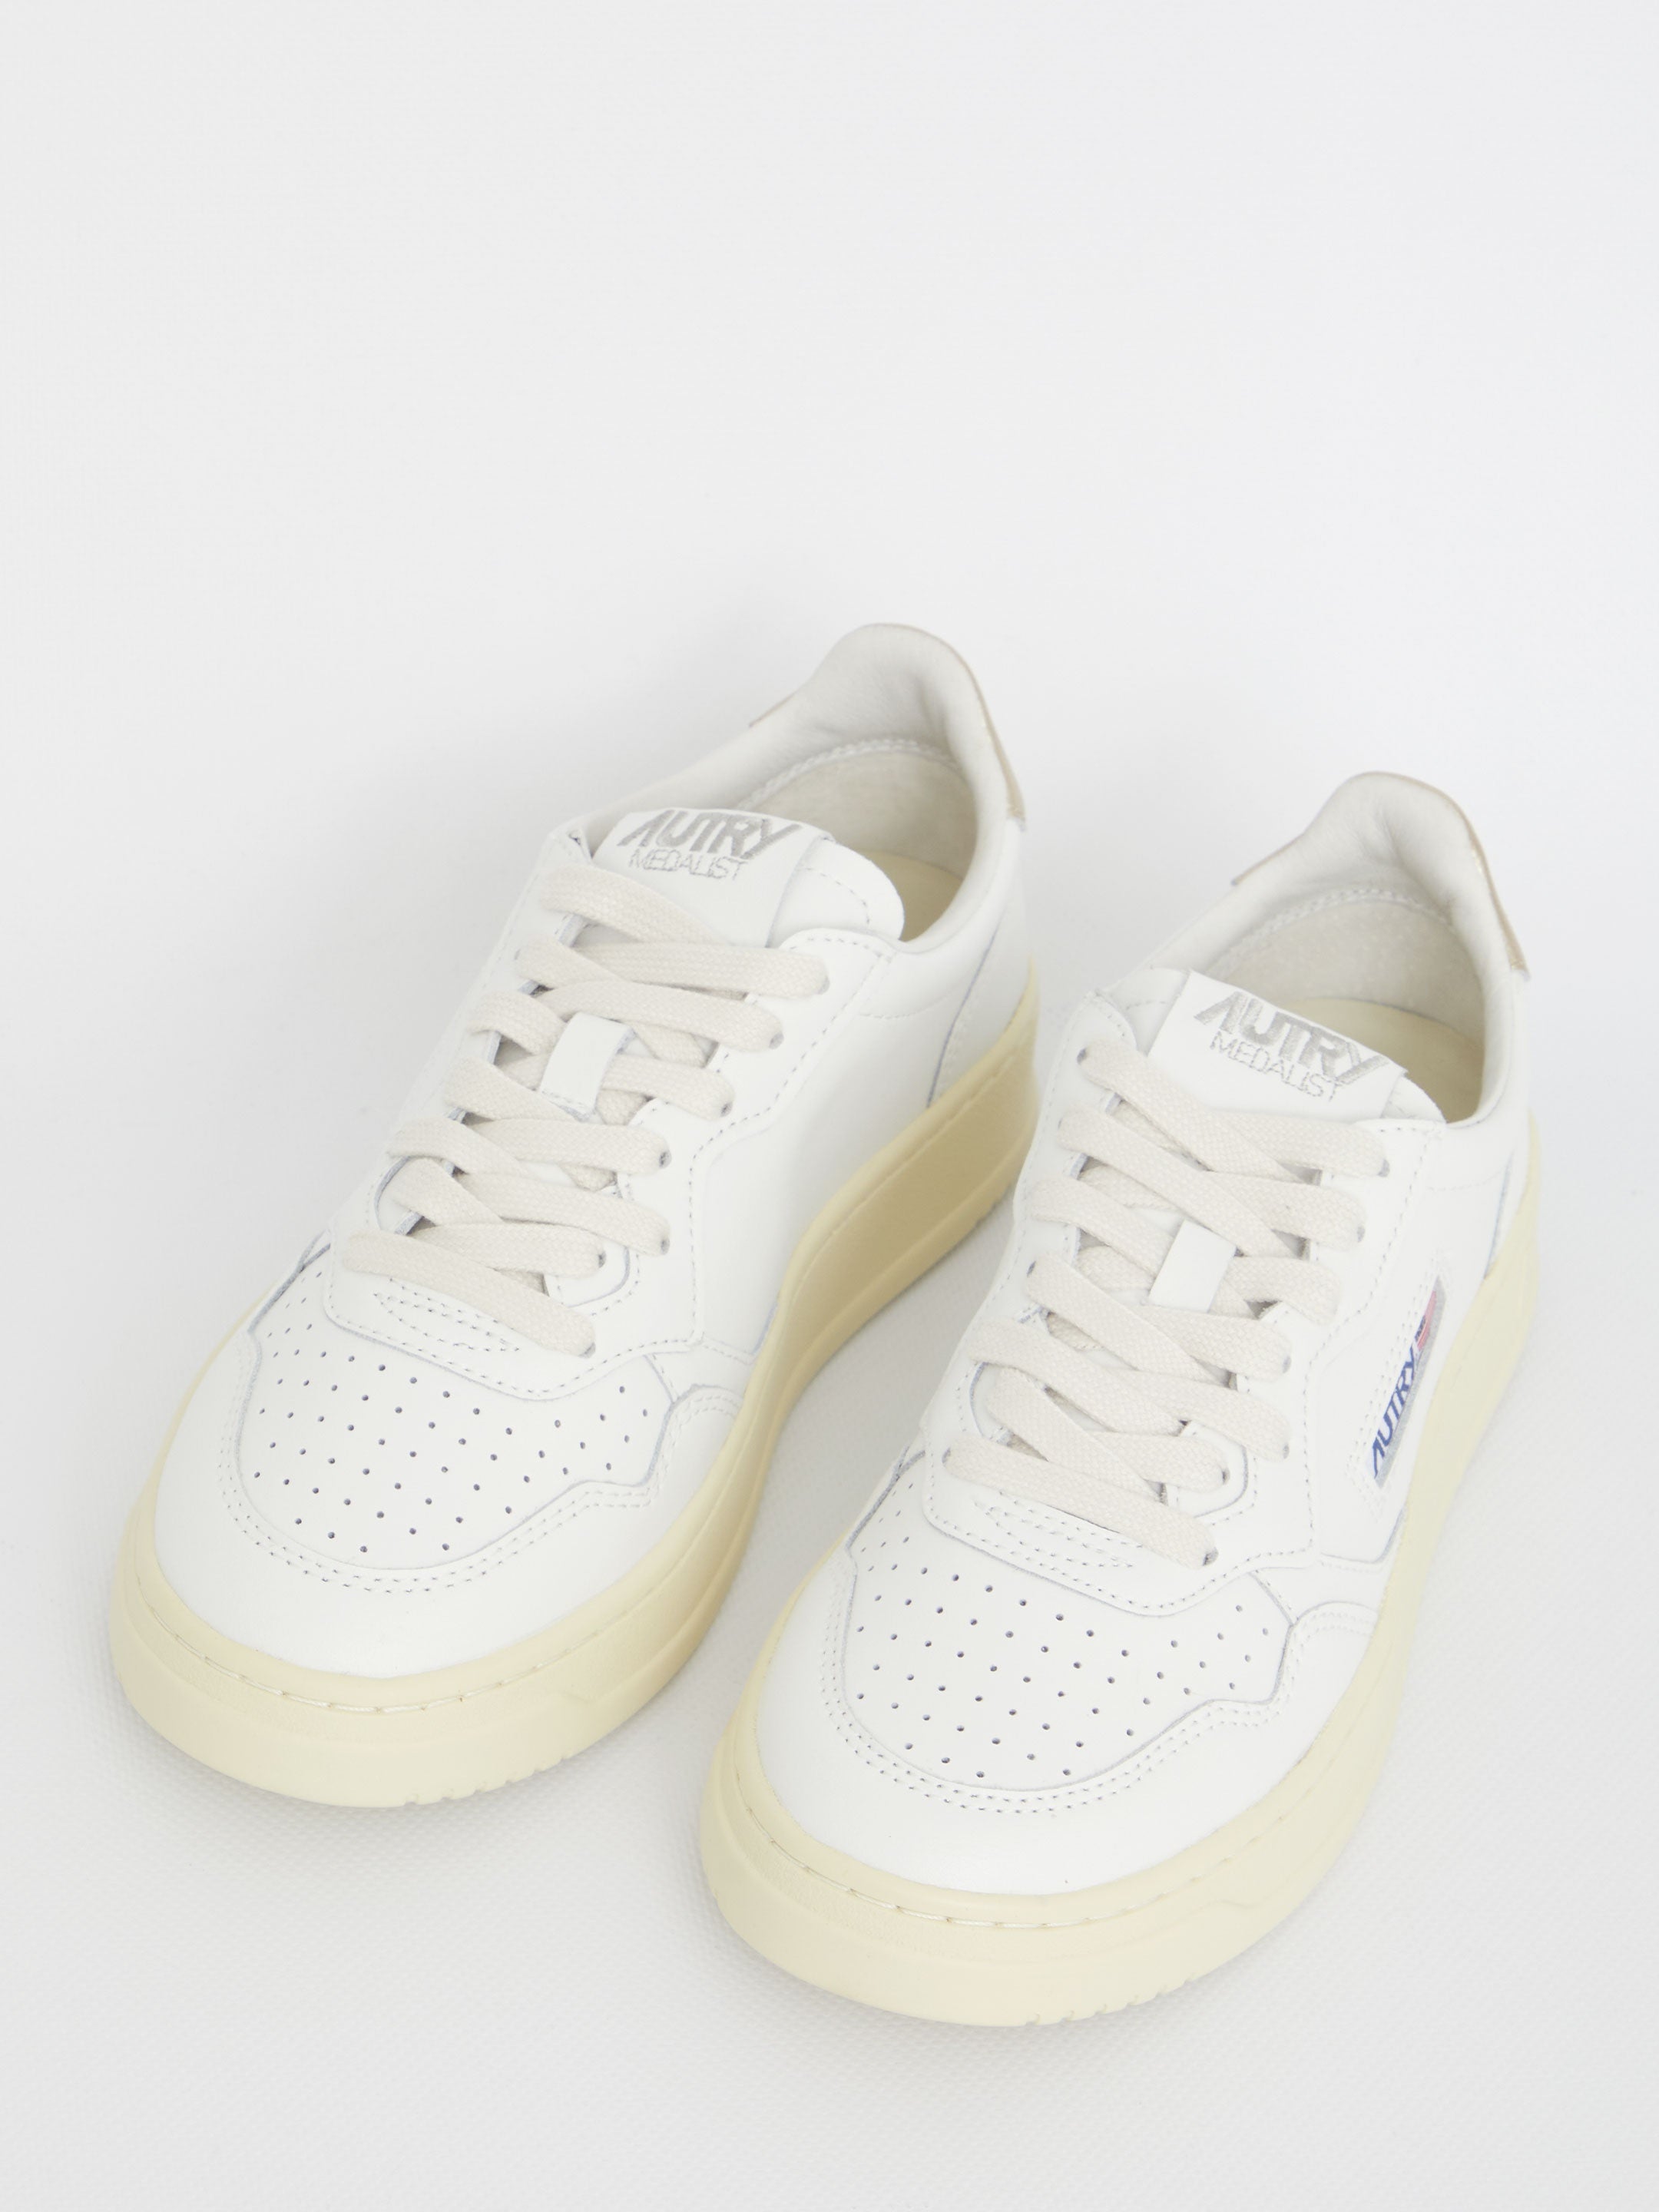 Medalist white and gold sneakers